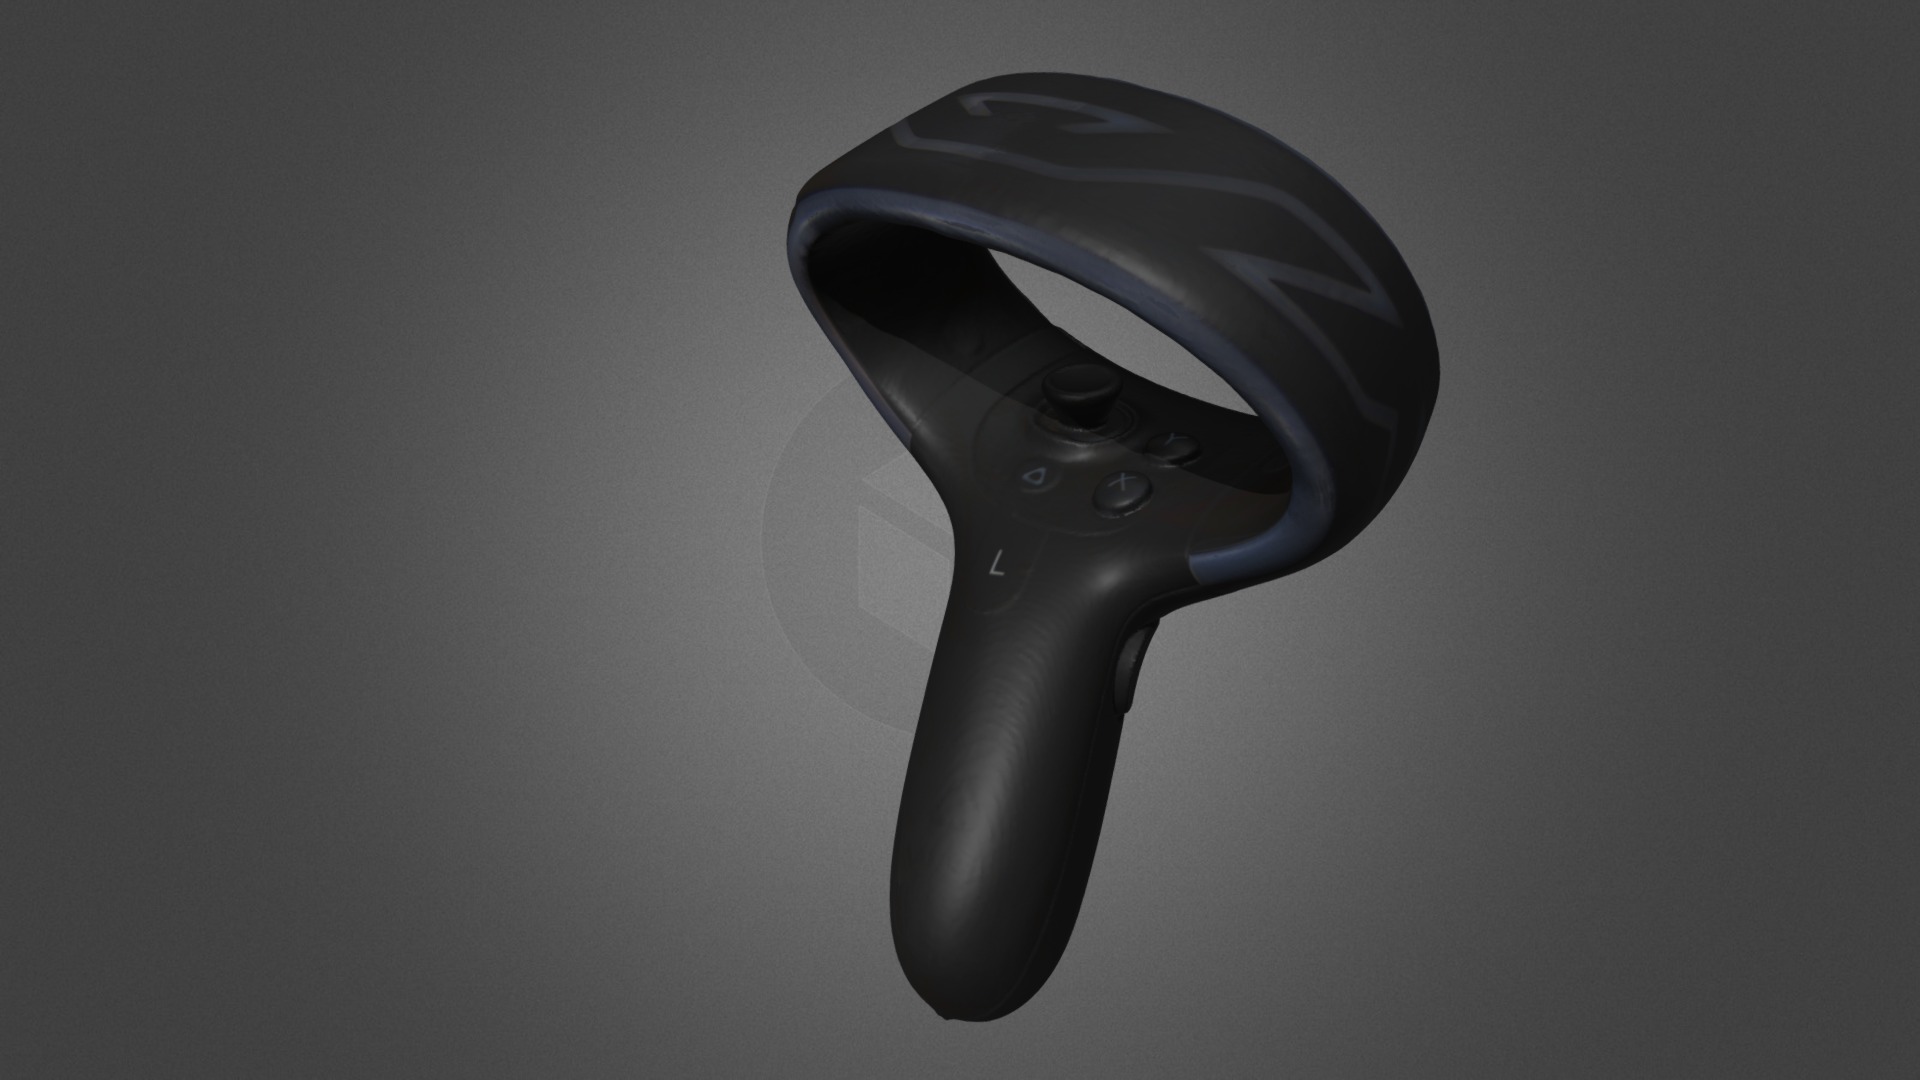 3D model HTC Vive Cosmos Controllers - This is a 3D model of the HTC Vive Cosmos Controllers. The 3D model is about a black and silver fan.